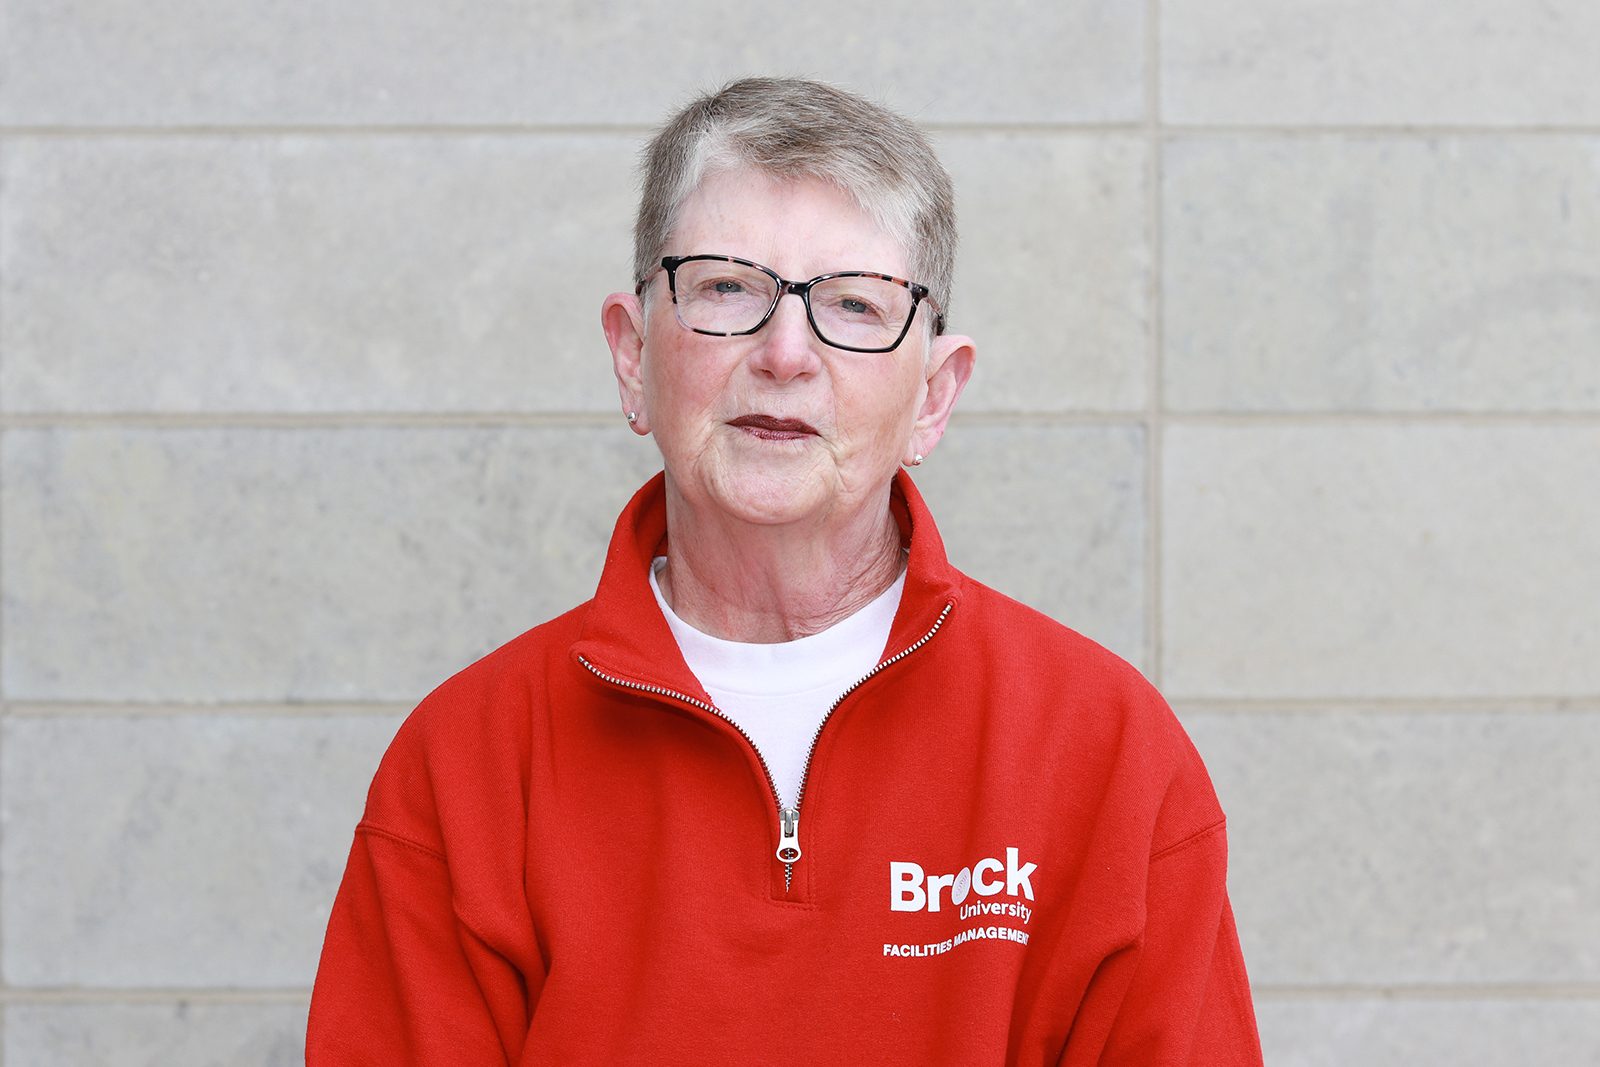 A headshot of a woman standing against a grey stone wall wearing a red zip-up sweater with the words “Brock University Facilities Management” written in white.